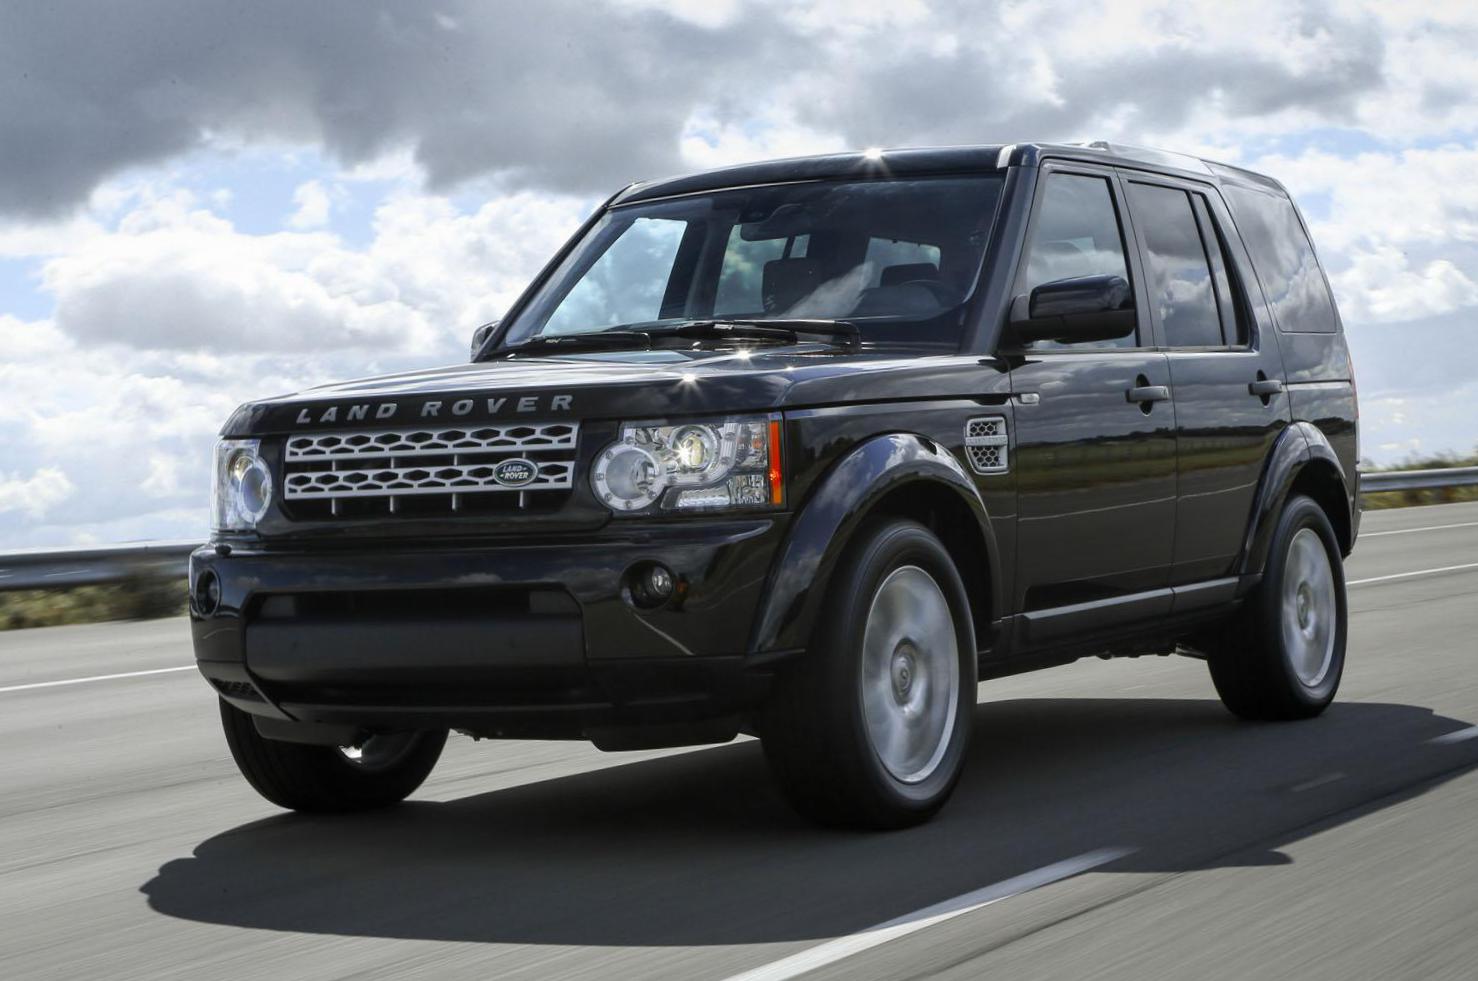 Discovery 4 Land Rover cost 2013